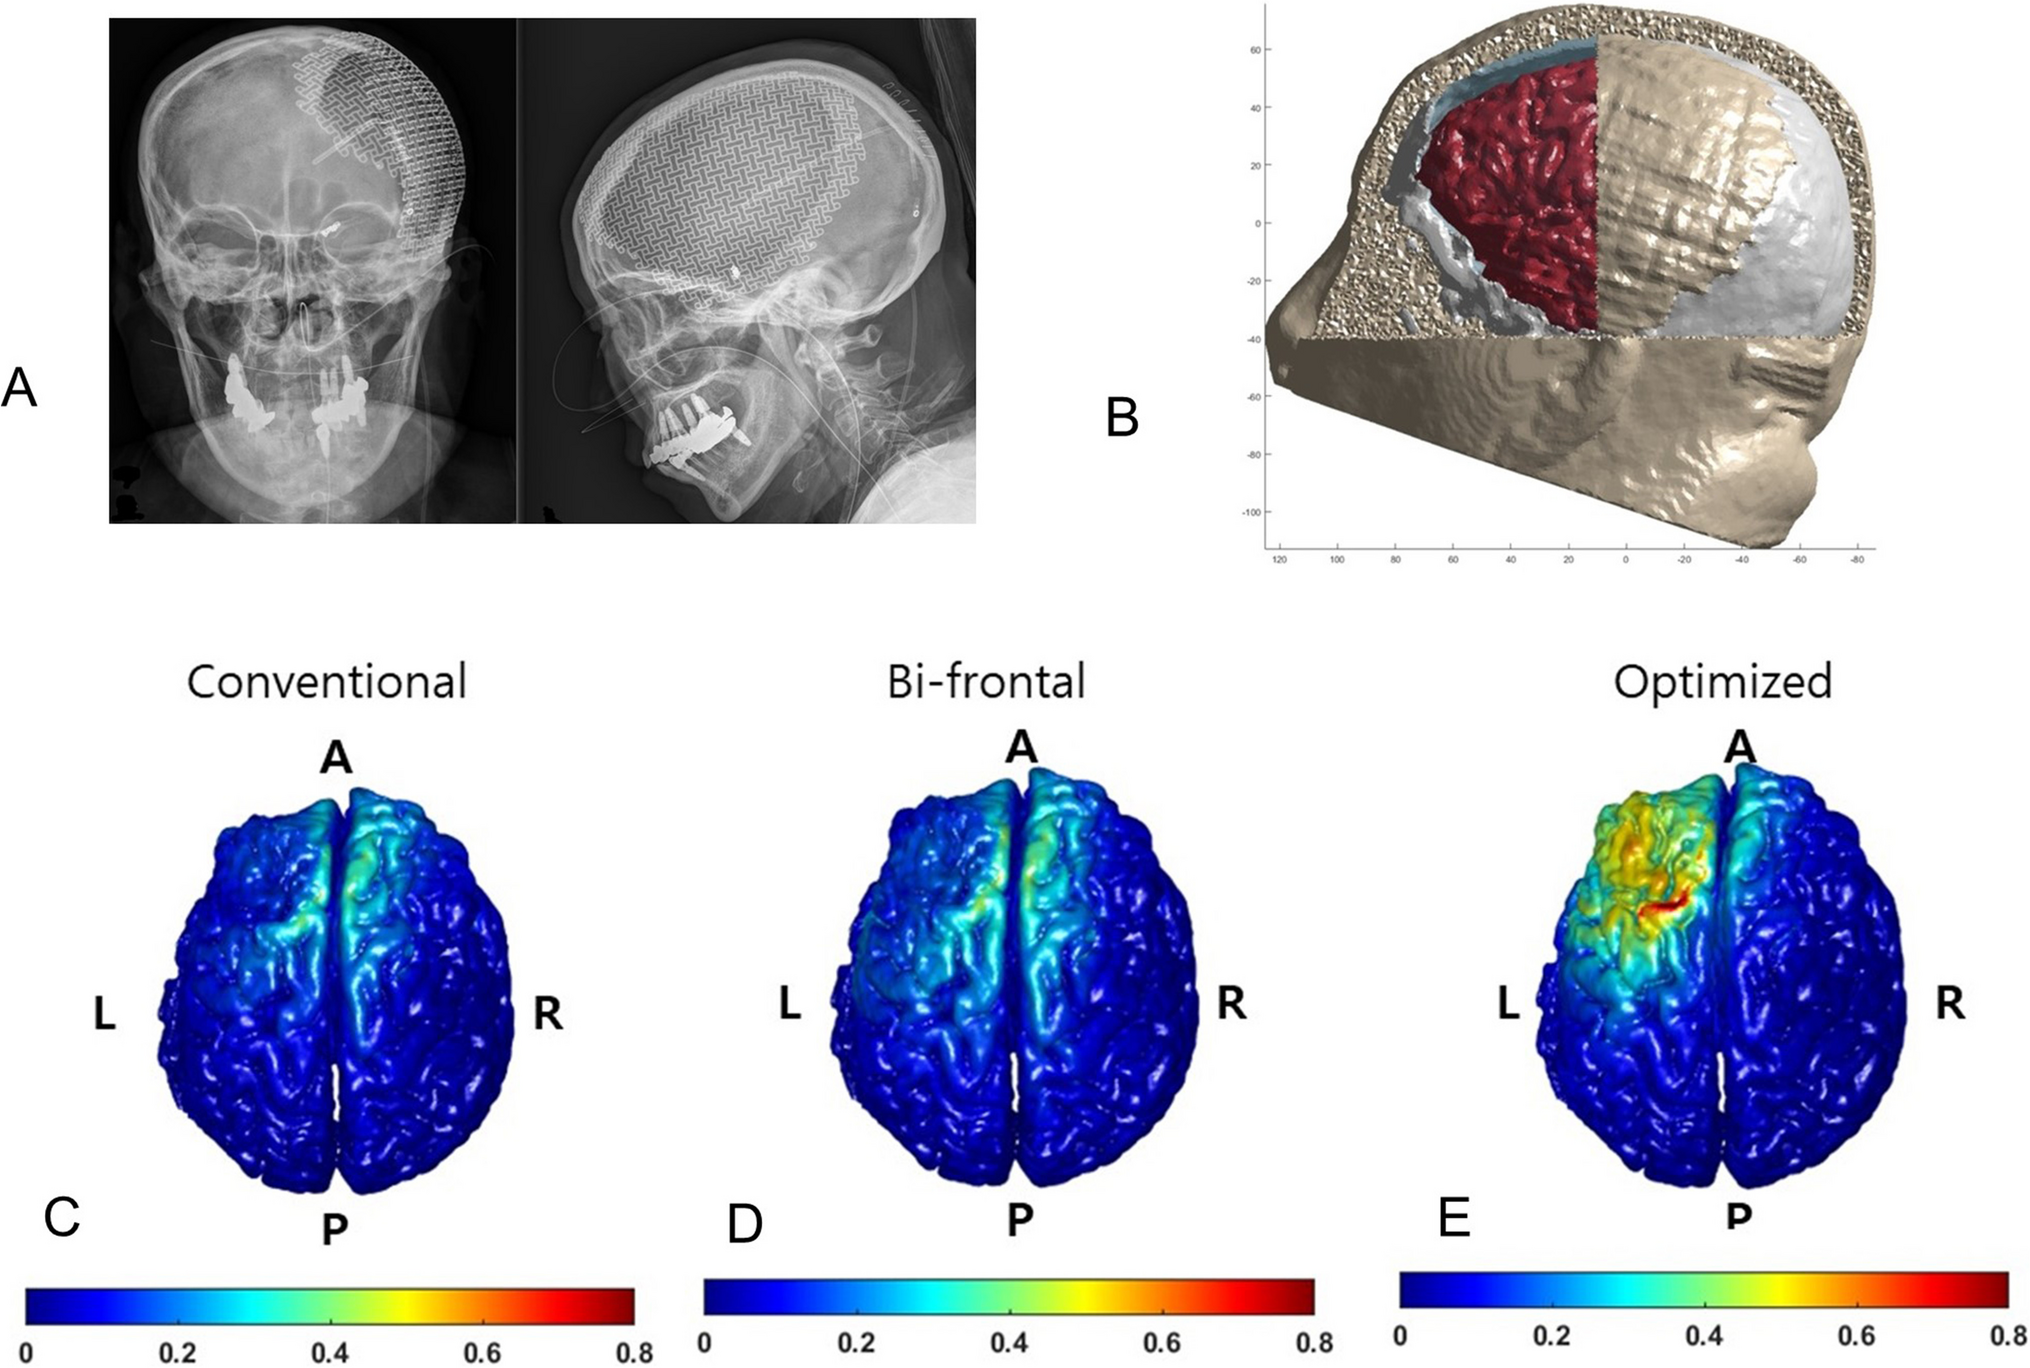 Optimized trans-cranial direct current stimulation for prolonged consciousness disorder in a patient with titanium mesh cranioplasty